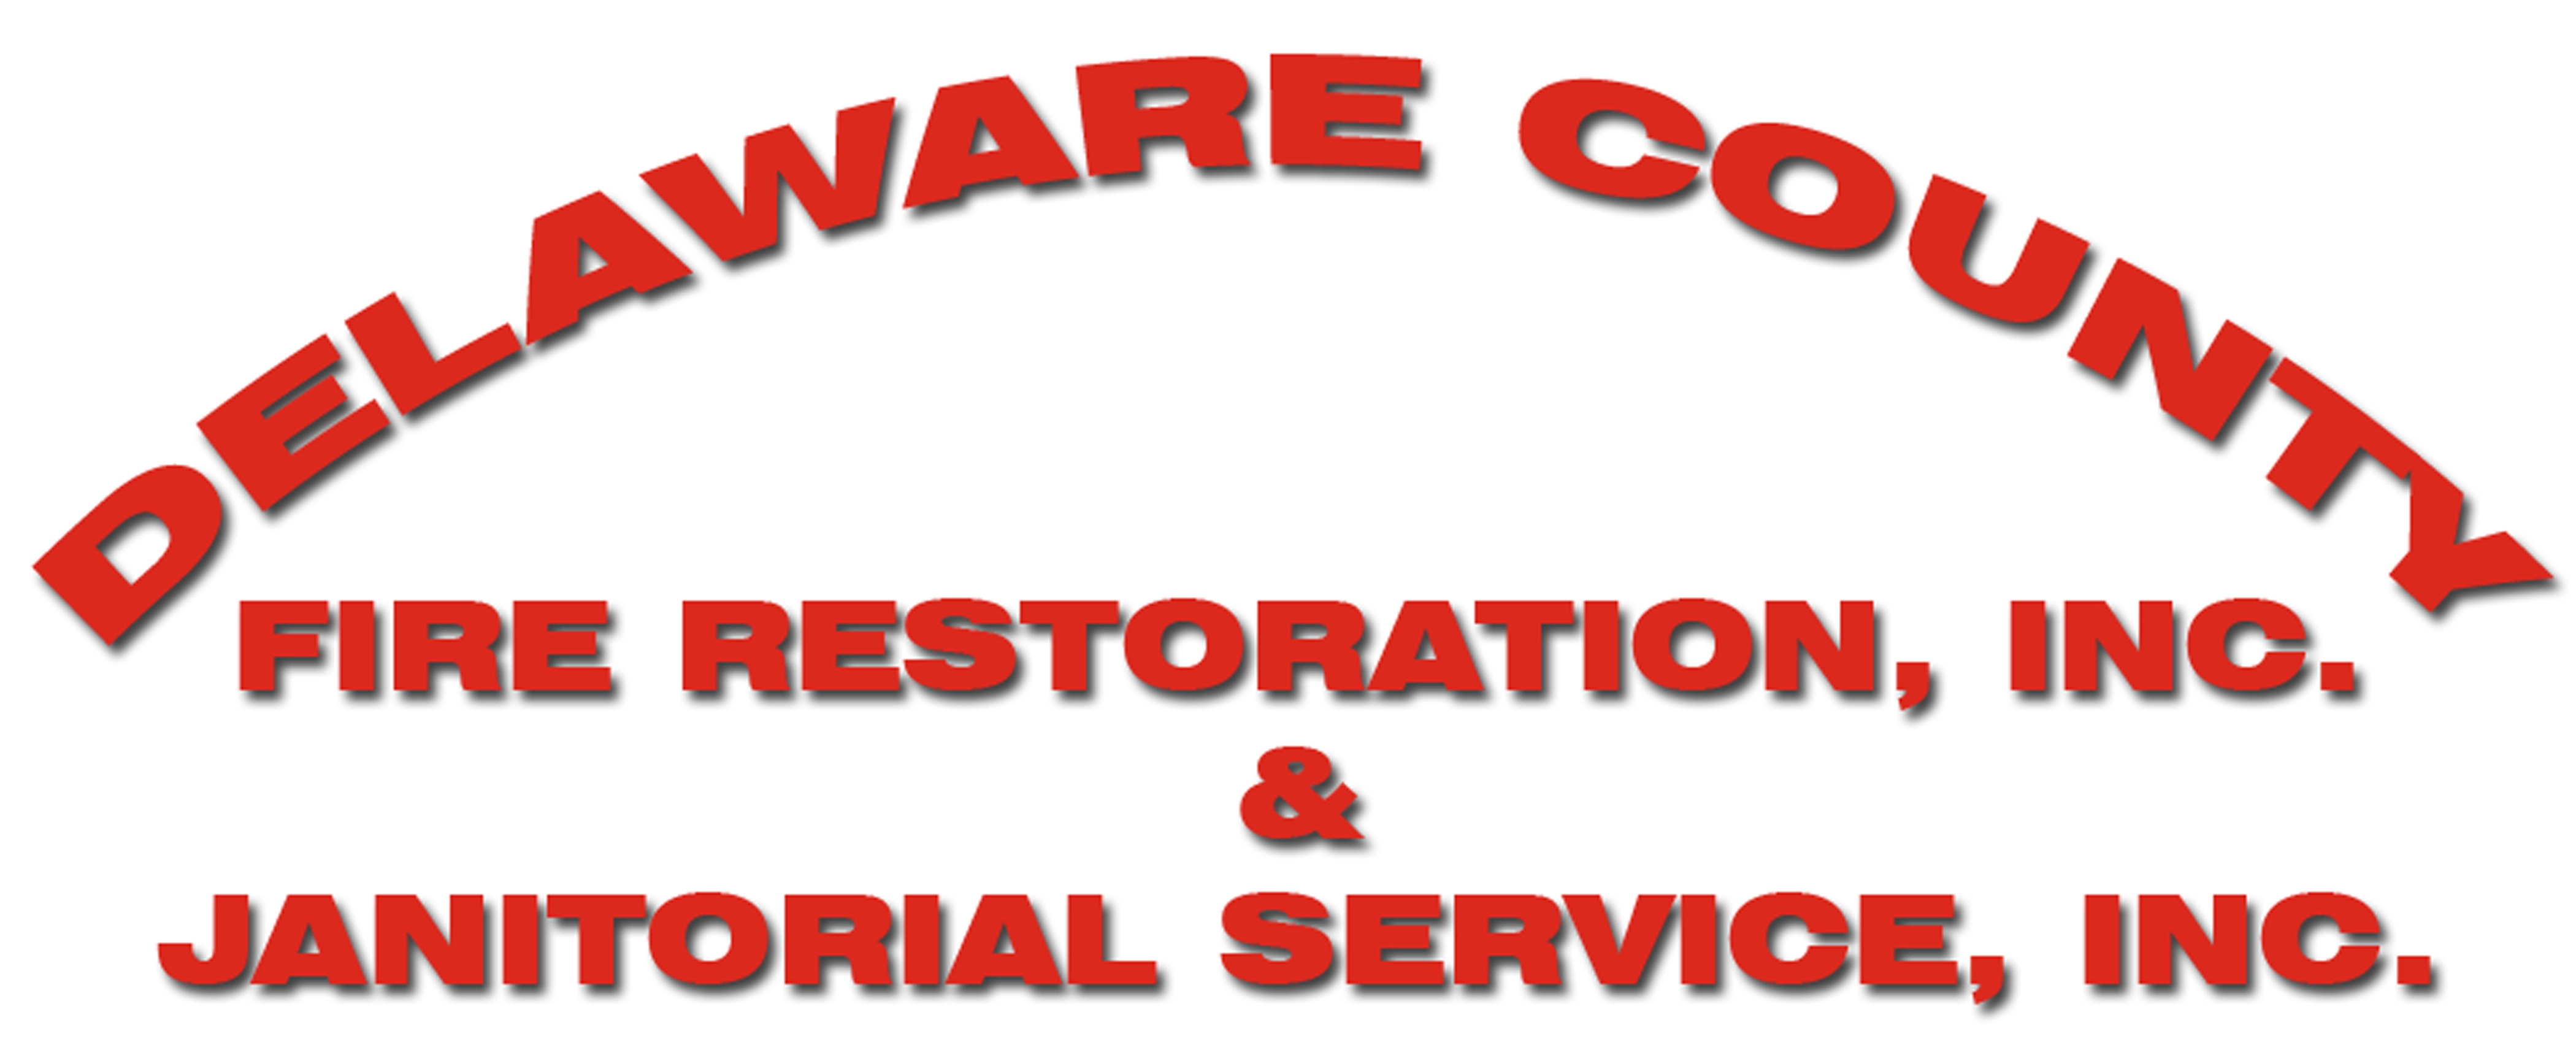 Delaware County Janitorial and Fire Restoration Company Logo